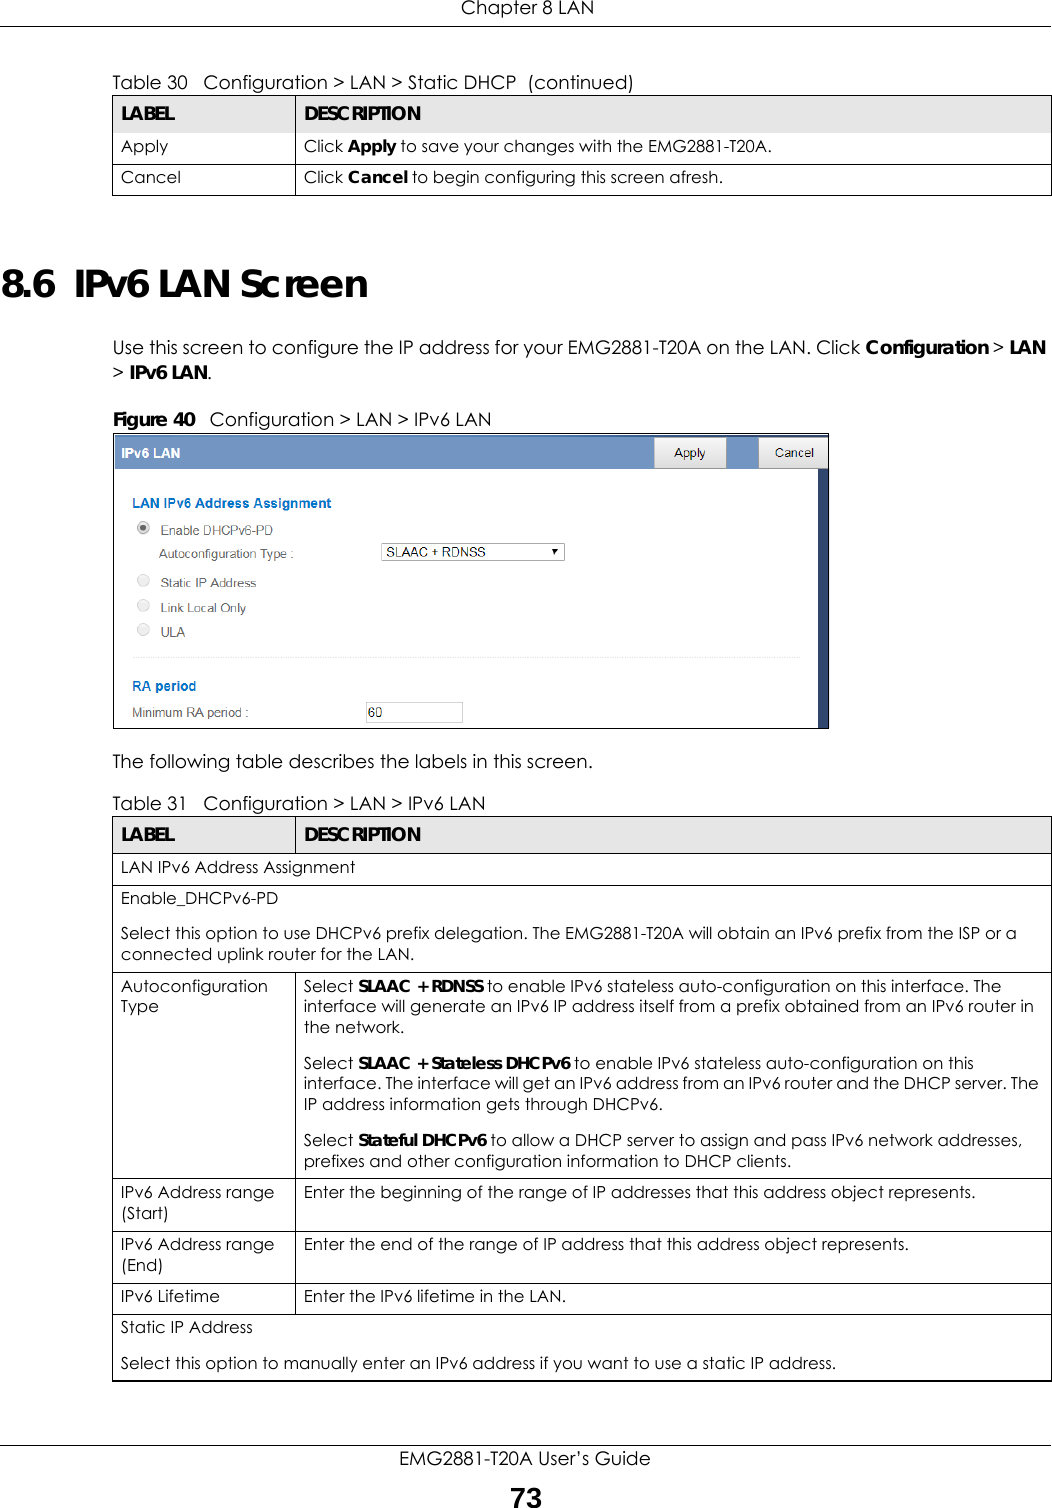  Chapter 8 LANEMG2881-T20A User’s Guide738.6  IPv6 LAN ScreenUse this screen to configure the IP address for your EMG2881-T20A on the LAN. Click Configuration &gt; LAN &gt; IPv6 LAN.Figure 40   Configuration &gt; LAN &gt; IPv6 LAN The following table describes the labels in this screen.Apply Click Apply to save your changes with the EMG2881-T20A.Cancel Click Cancel to begin configuring this screen afresh.Table 30   Configuration &gt; LAN &gt; Static DHCP  (continued)LABEL DESCRIPTIONTable 31   Configuration &gt; LAN &gt; IPv6 LANLABEL DESCRIPTIONLAN IPv6 Address AssignmentEnable_DHCPv6-PD Select this option to use DHCPv6 prefix delegation. The EMG2881-T20A will obtain an IPv6 prefix from the ISP or a connected uplink router for the LAN.Autoconfiguration TypeSelect SLAAC + RDNSS to enable IPv6 stateless auto-configuration on this interface. The interface will generate an IPv6 IP address itself from a prefix obtained from an IPv6 router in the network.Select SLAAC + Stateless DHCPv6 to enable IPv6 stateless auto-configuration on this interface. The interface will get an IPv6 address from an IPv6 router and the DHCP server. The IP address information gets through DHCPv6.Select Stateful DHCPv6 to allow a DHCP server to assign and pass IPv6 network addresses, prefixes and other configuration information to DHCP clients.IPv6 Address range (Start)Enter the beginning of the range of IP addresses that this address object represents.IPv6 Address range (End) Enter the end of the range of IP address that this address object represents.IPv6 Lifetime Enter the IPv6 lifetime in the LAN.Static IP AddressSelect this option to manually enter an IPv6 address if you want to use a static IP address.